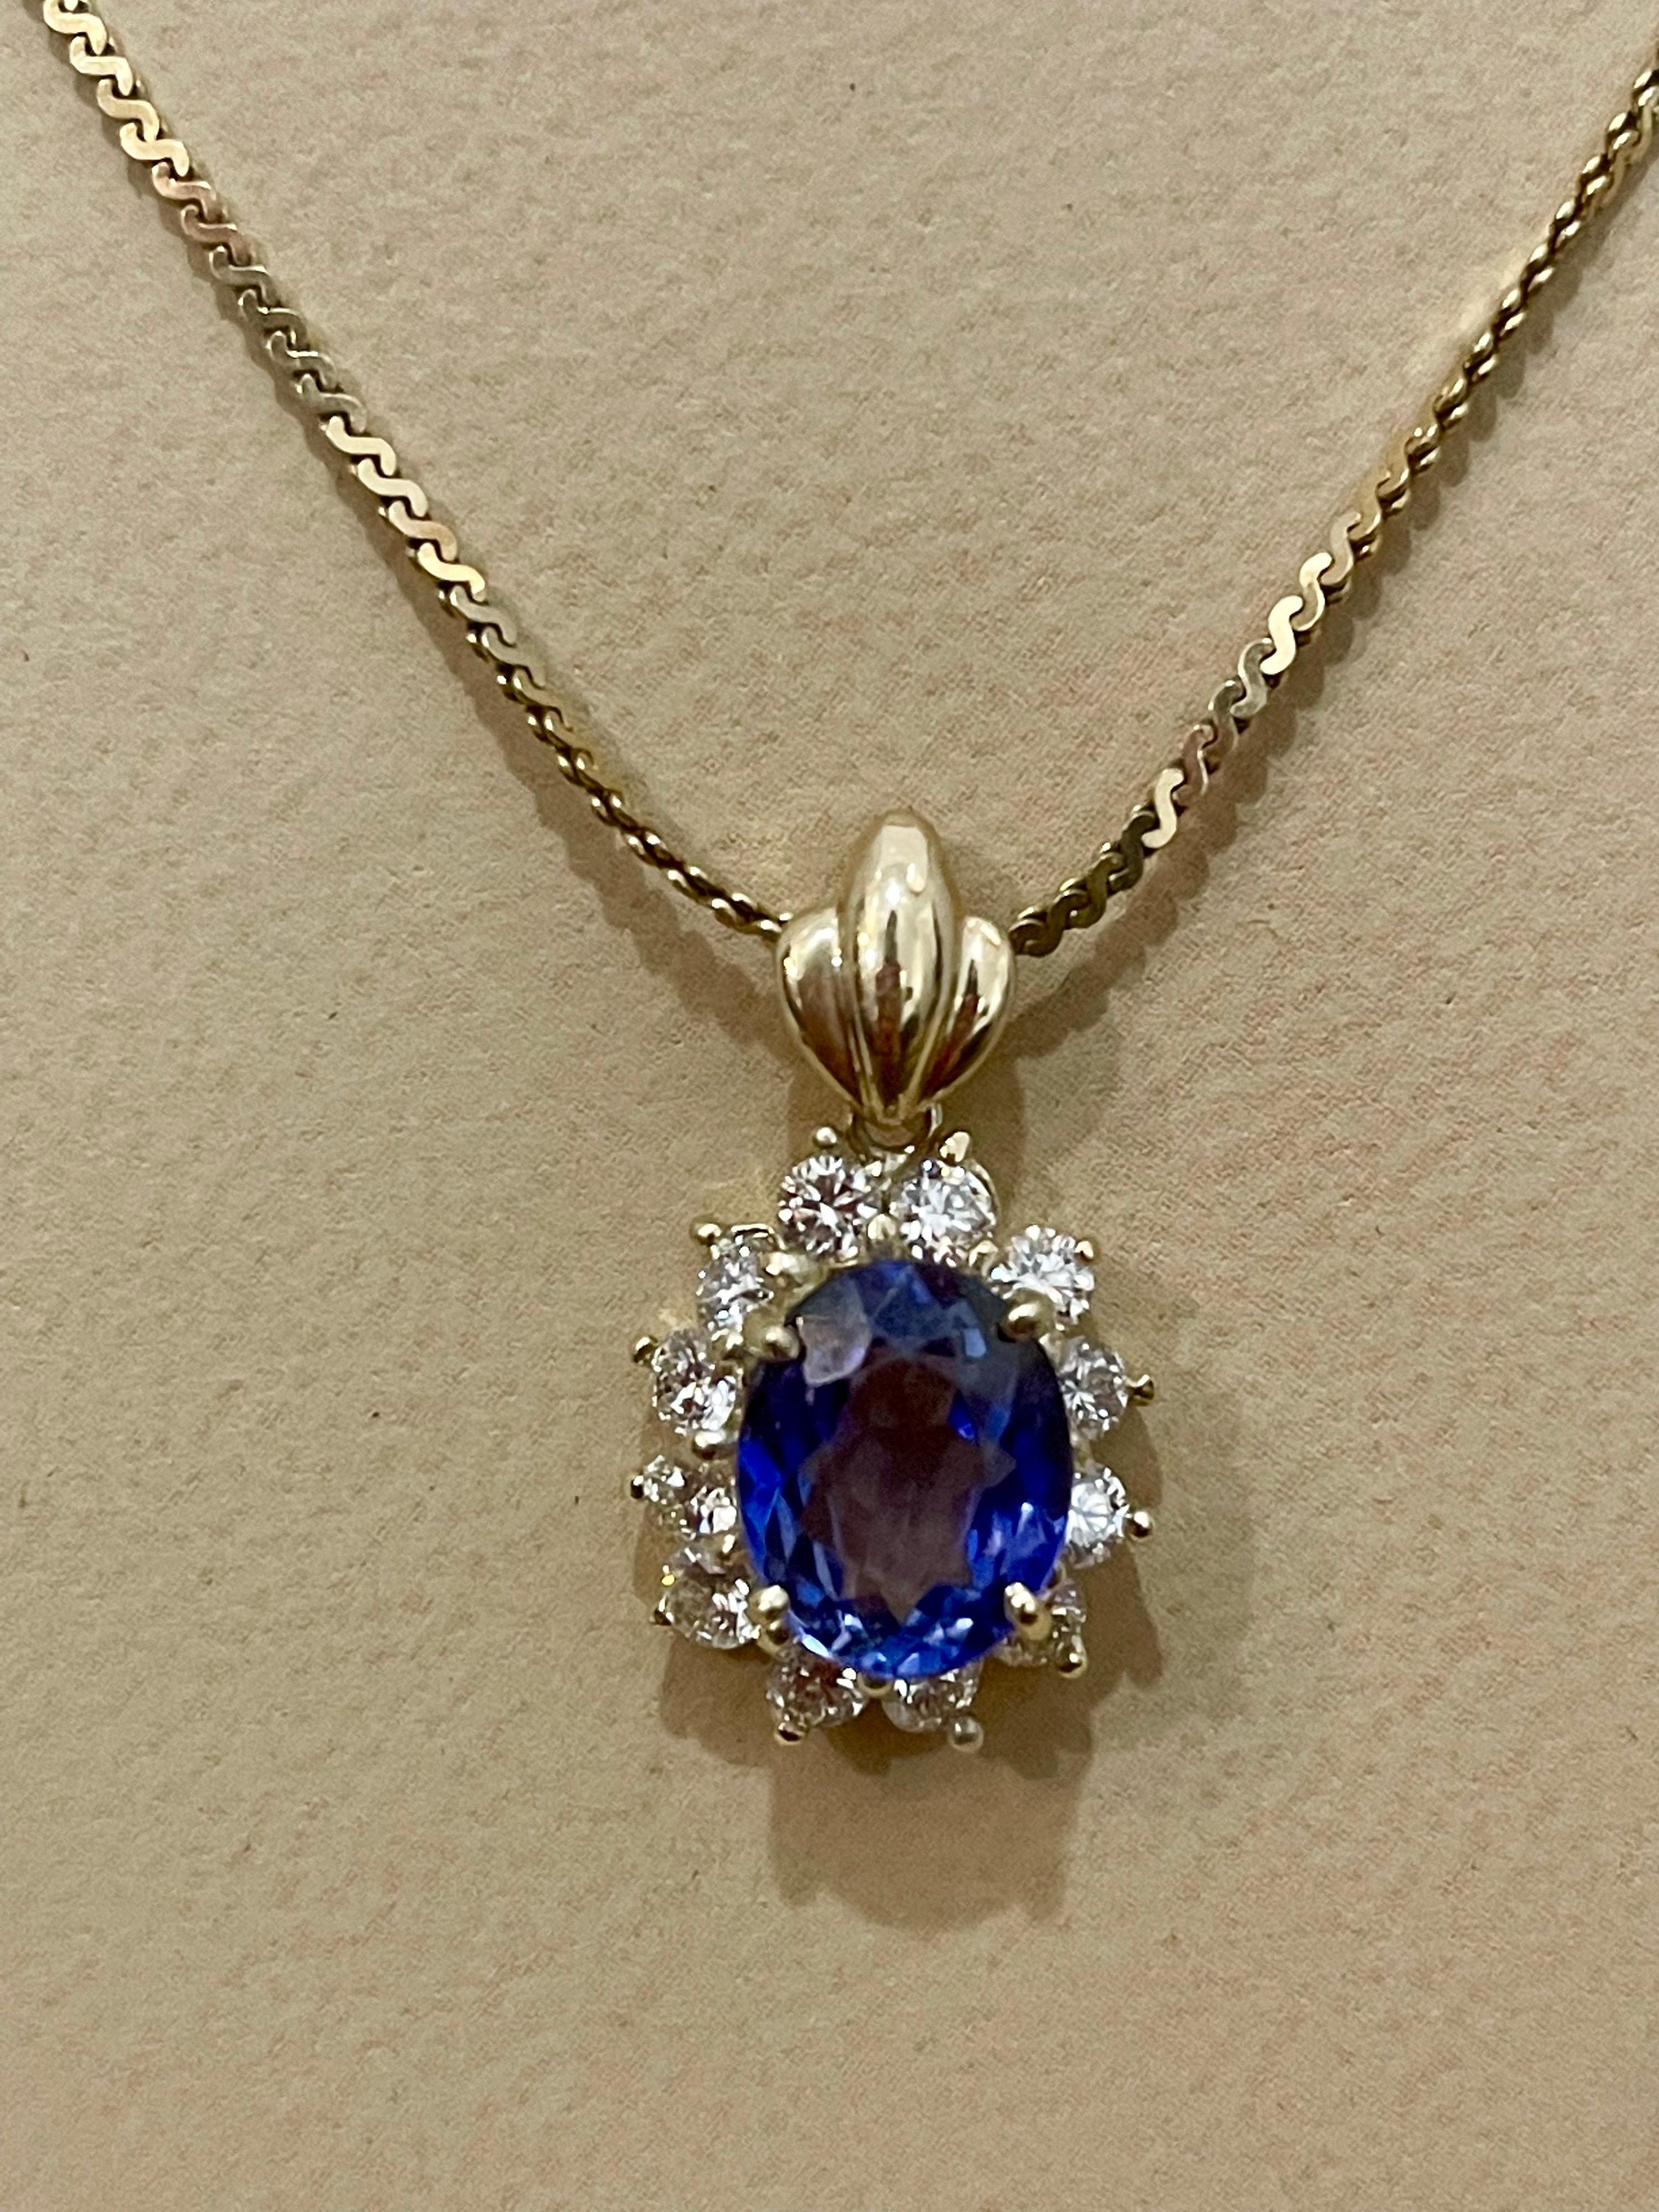 3 Carat Tanzanite and 1 Ct Diamond Pendant or Necklace 14 Karat Yellow Gold For Sale 3